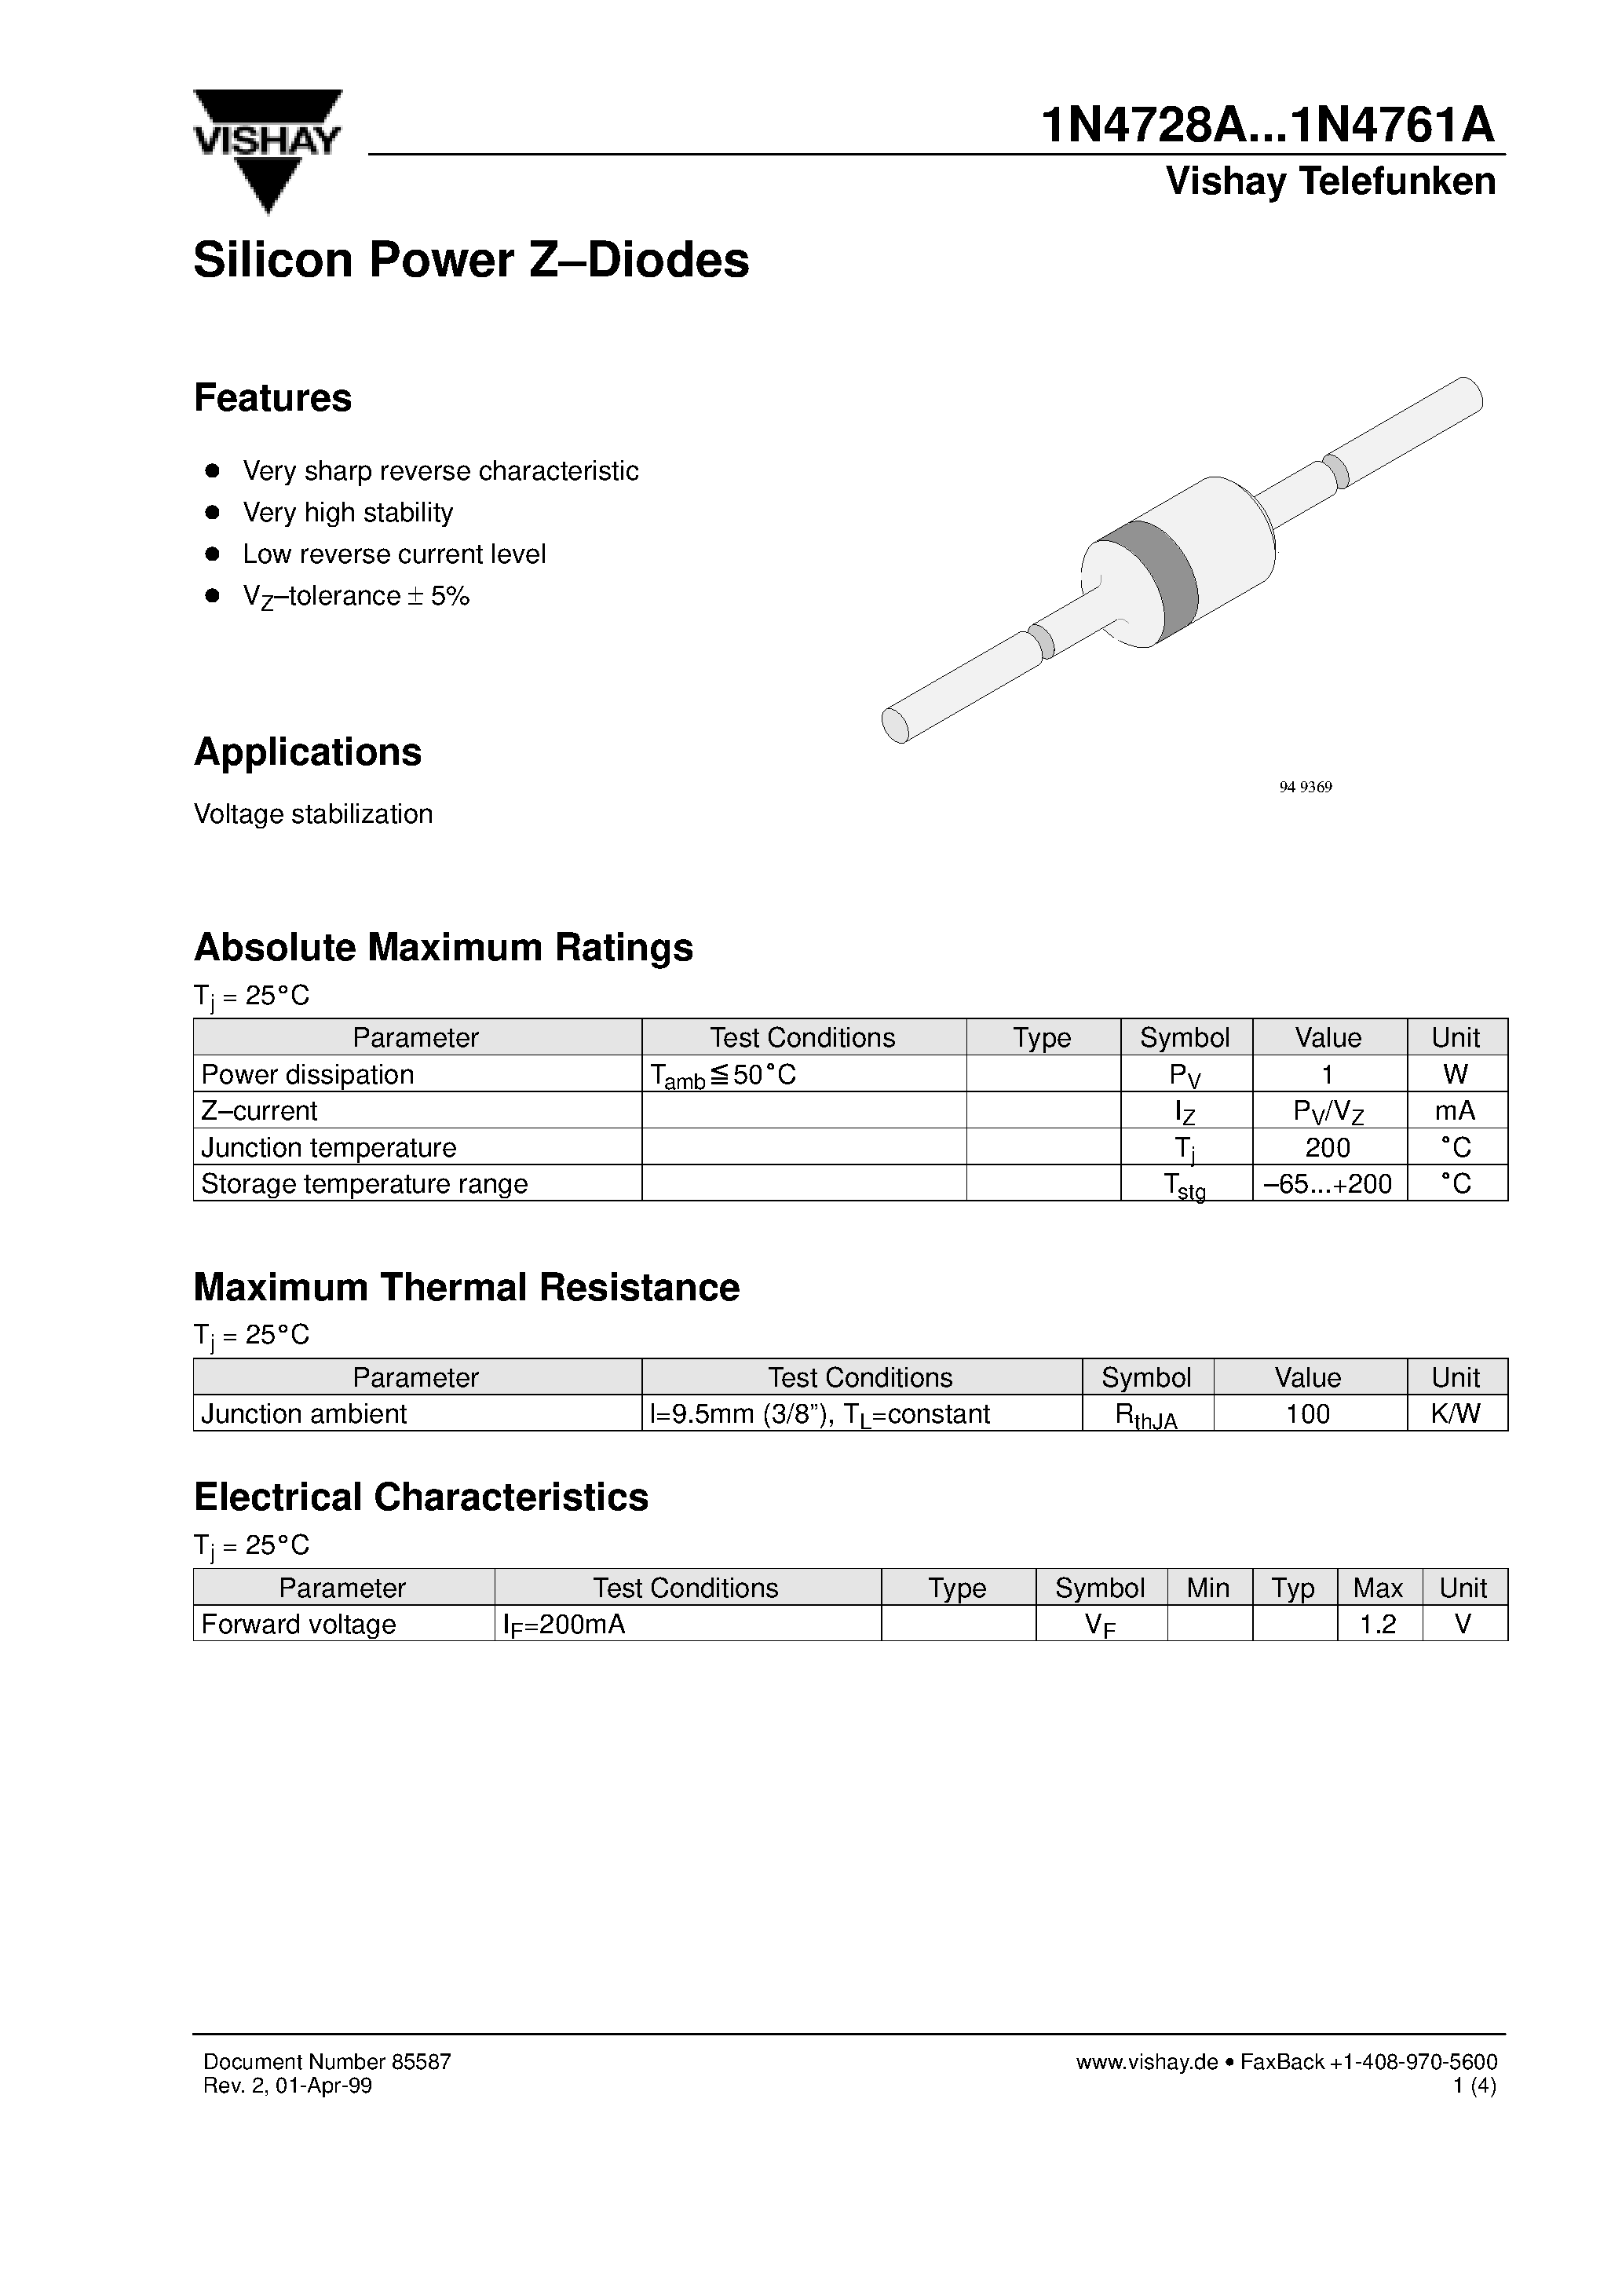 Datasheet 1N4744A - Silicon Power Z-Diodes page 1